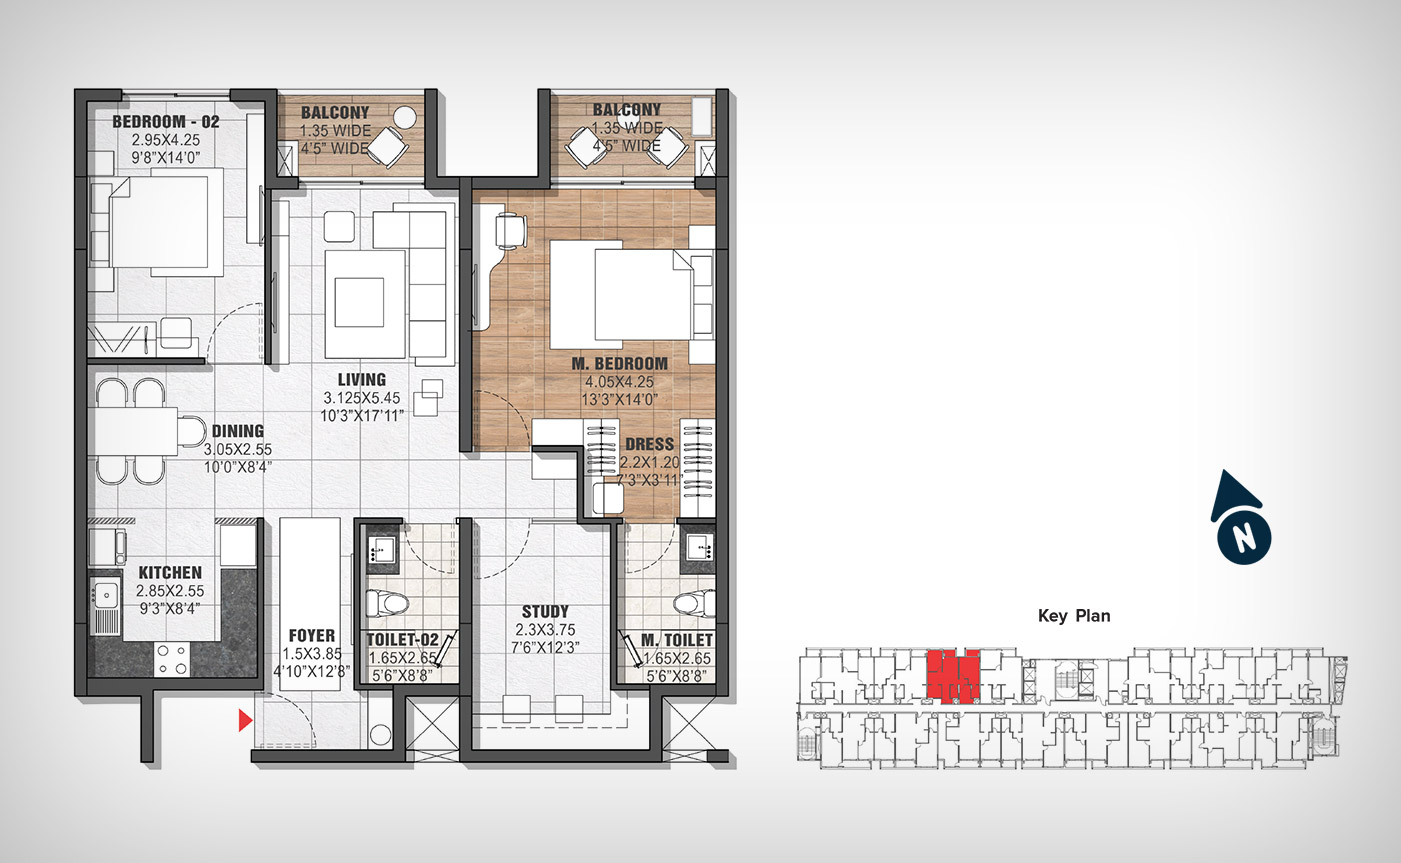 2.5 BHK Bedroom Plan For The Residences at BTG